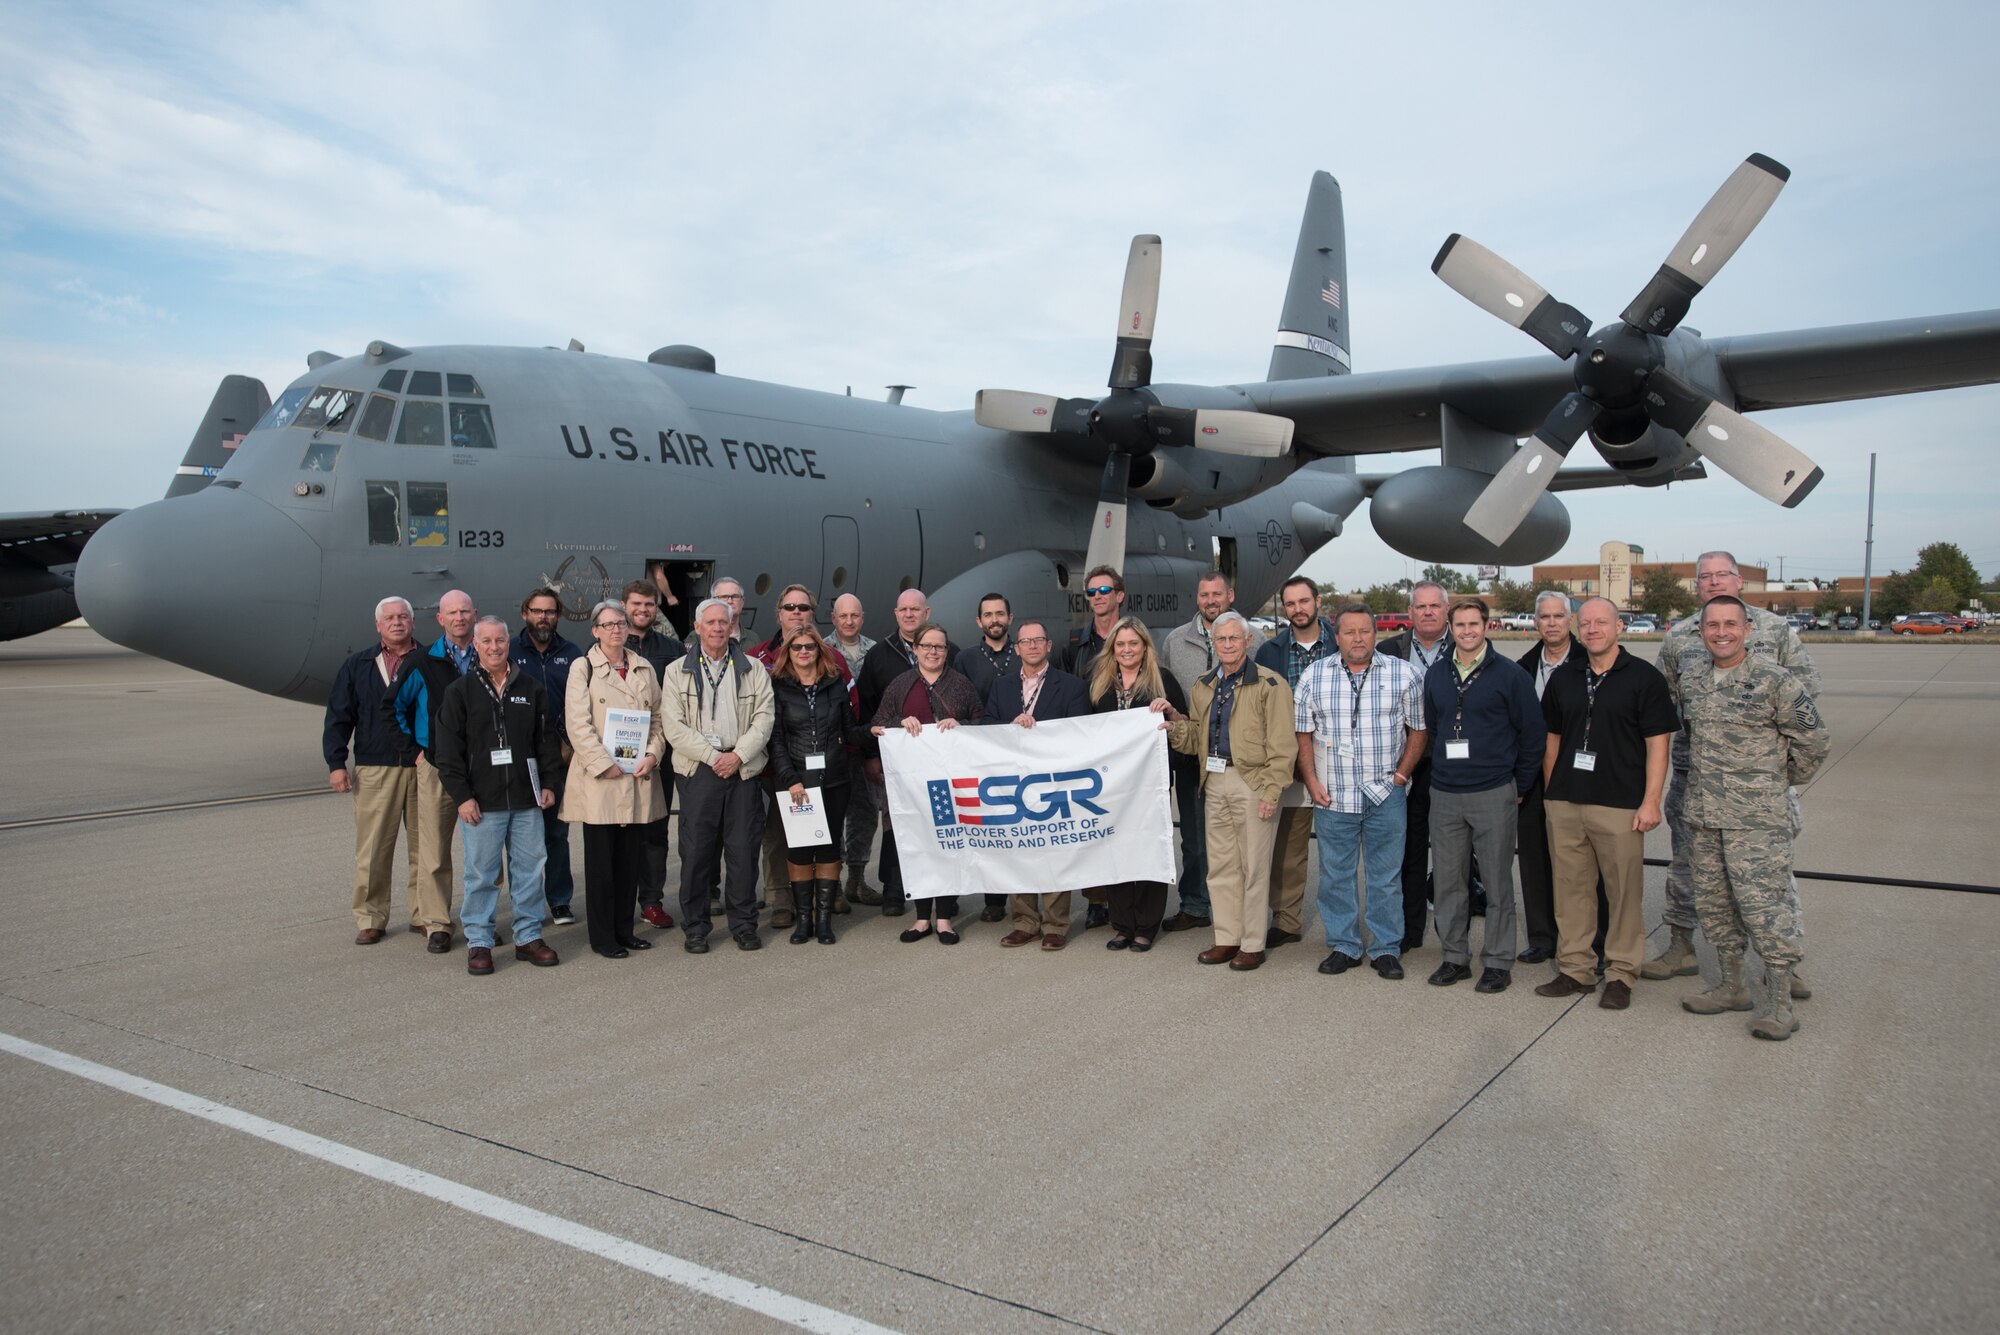 Nearly two-dozen civilian employers stand in front of a Kentucky Air National Guard C-130 aircraft with Airmen from the 123rd Airlift Wing and representatives of the Kentucky Committee for Employer Support of the Guard and Reserve at the Kentucky Air National Guard Base in Louisville, Ky., Oct. 26, 2016.  The employers were participating in an ESGR “Bosslift,” which enhances awareness and understanding between National Guardsmen and the civilian employers for whom they work when they’re not on duty. (U.S. Air National Guard photo by Master Sgt. Phil Speck)